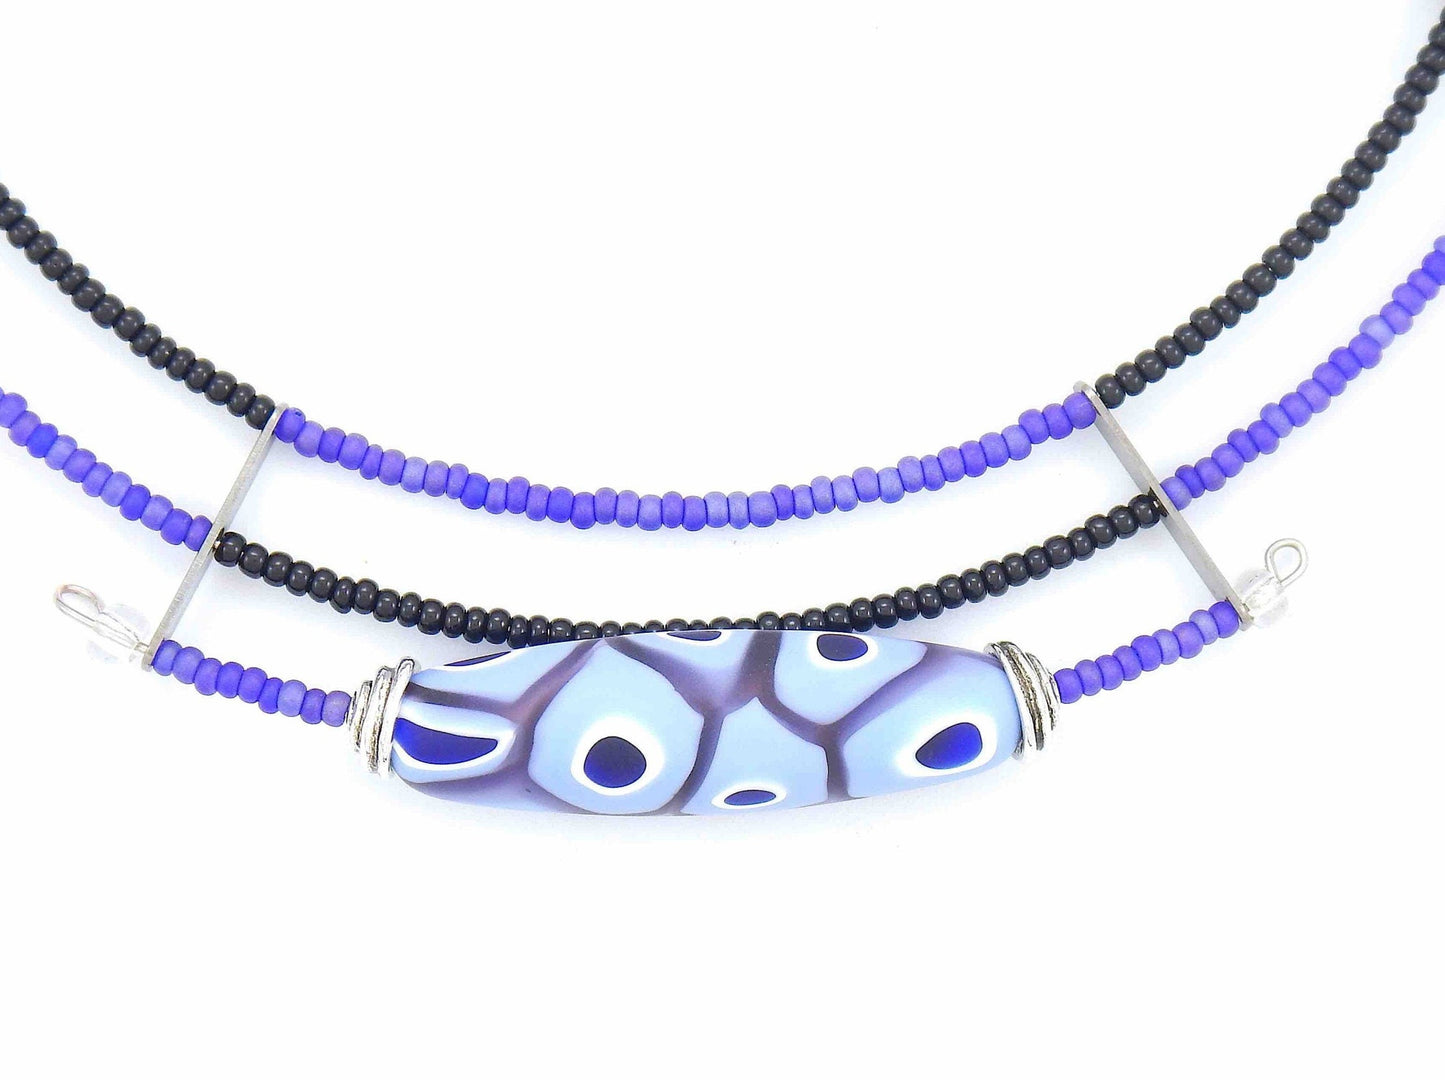 Short asymmetric necklace with matte lilac and black Murano glass bead, eye-dot pattern, metal clasp